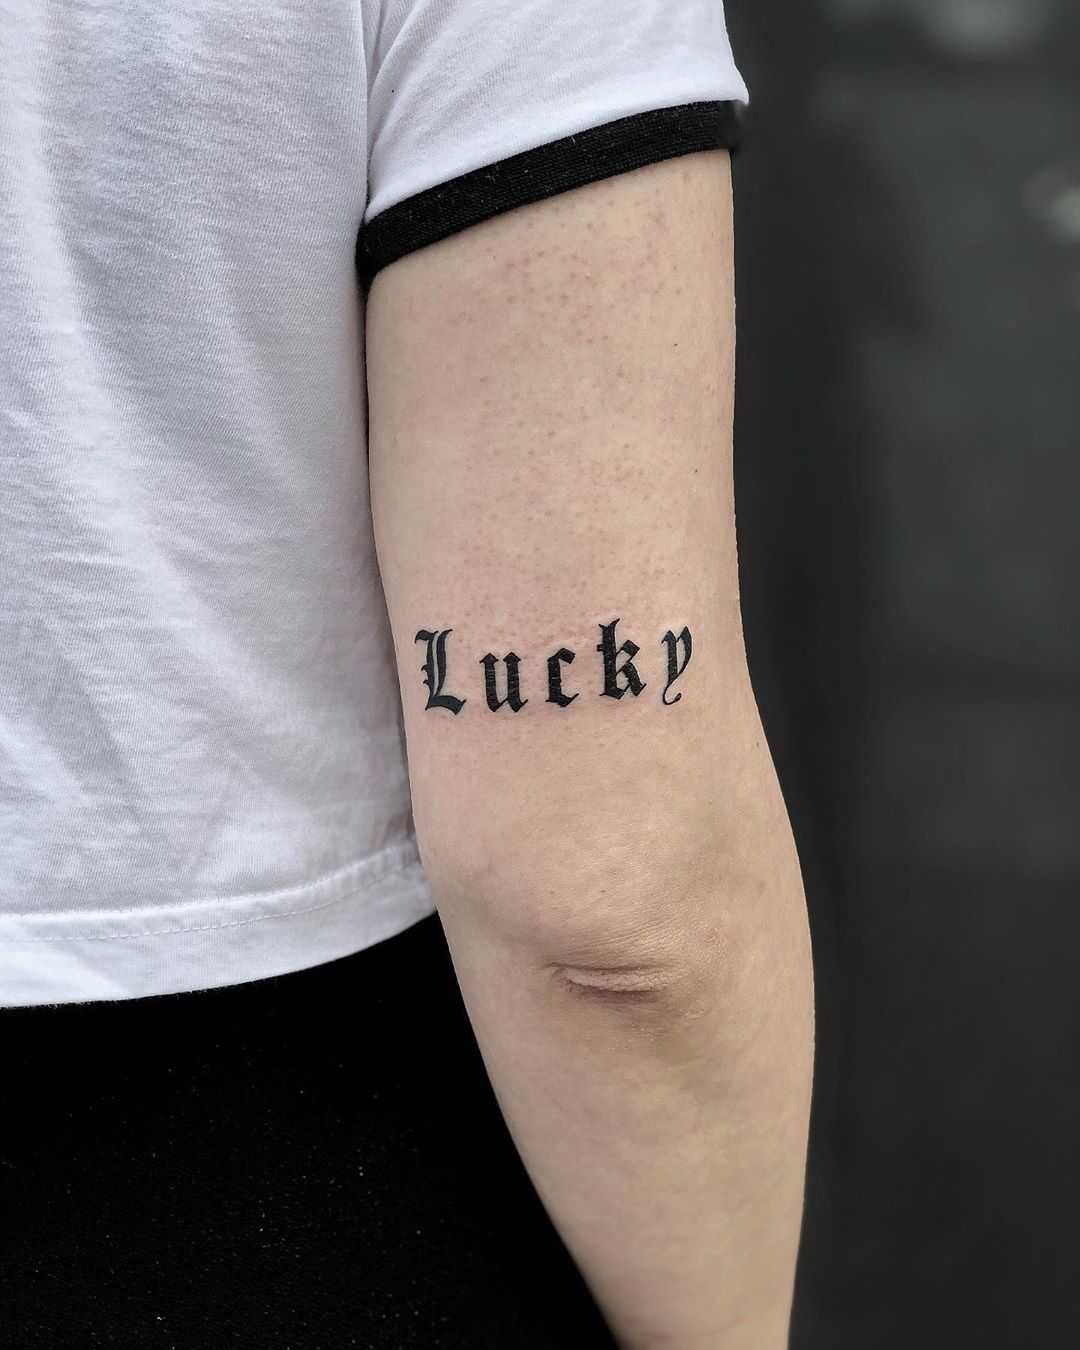 Lucky tattoo by Loz McLean